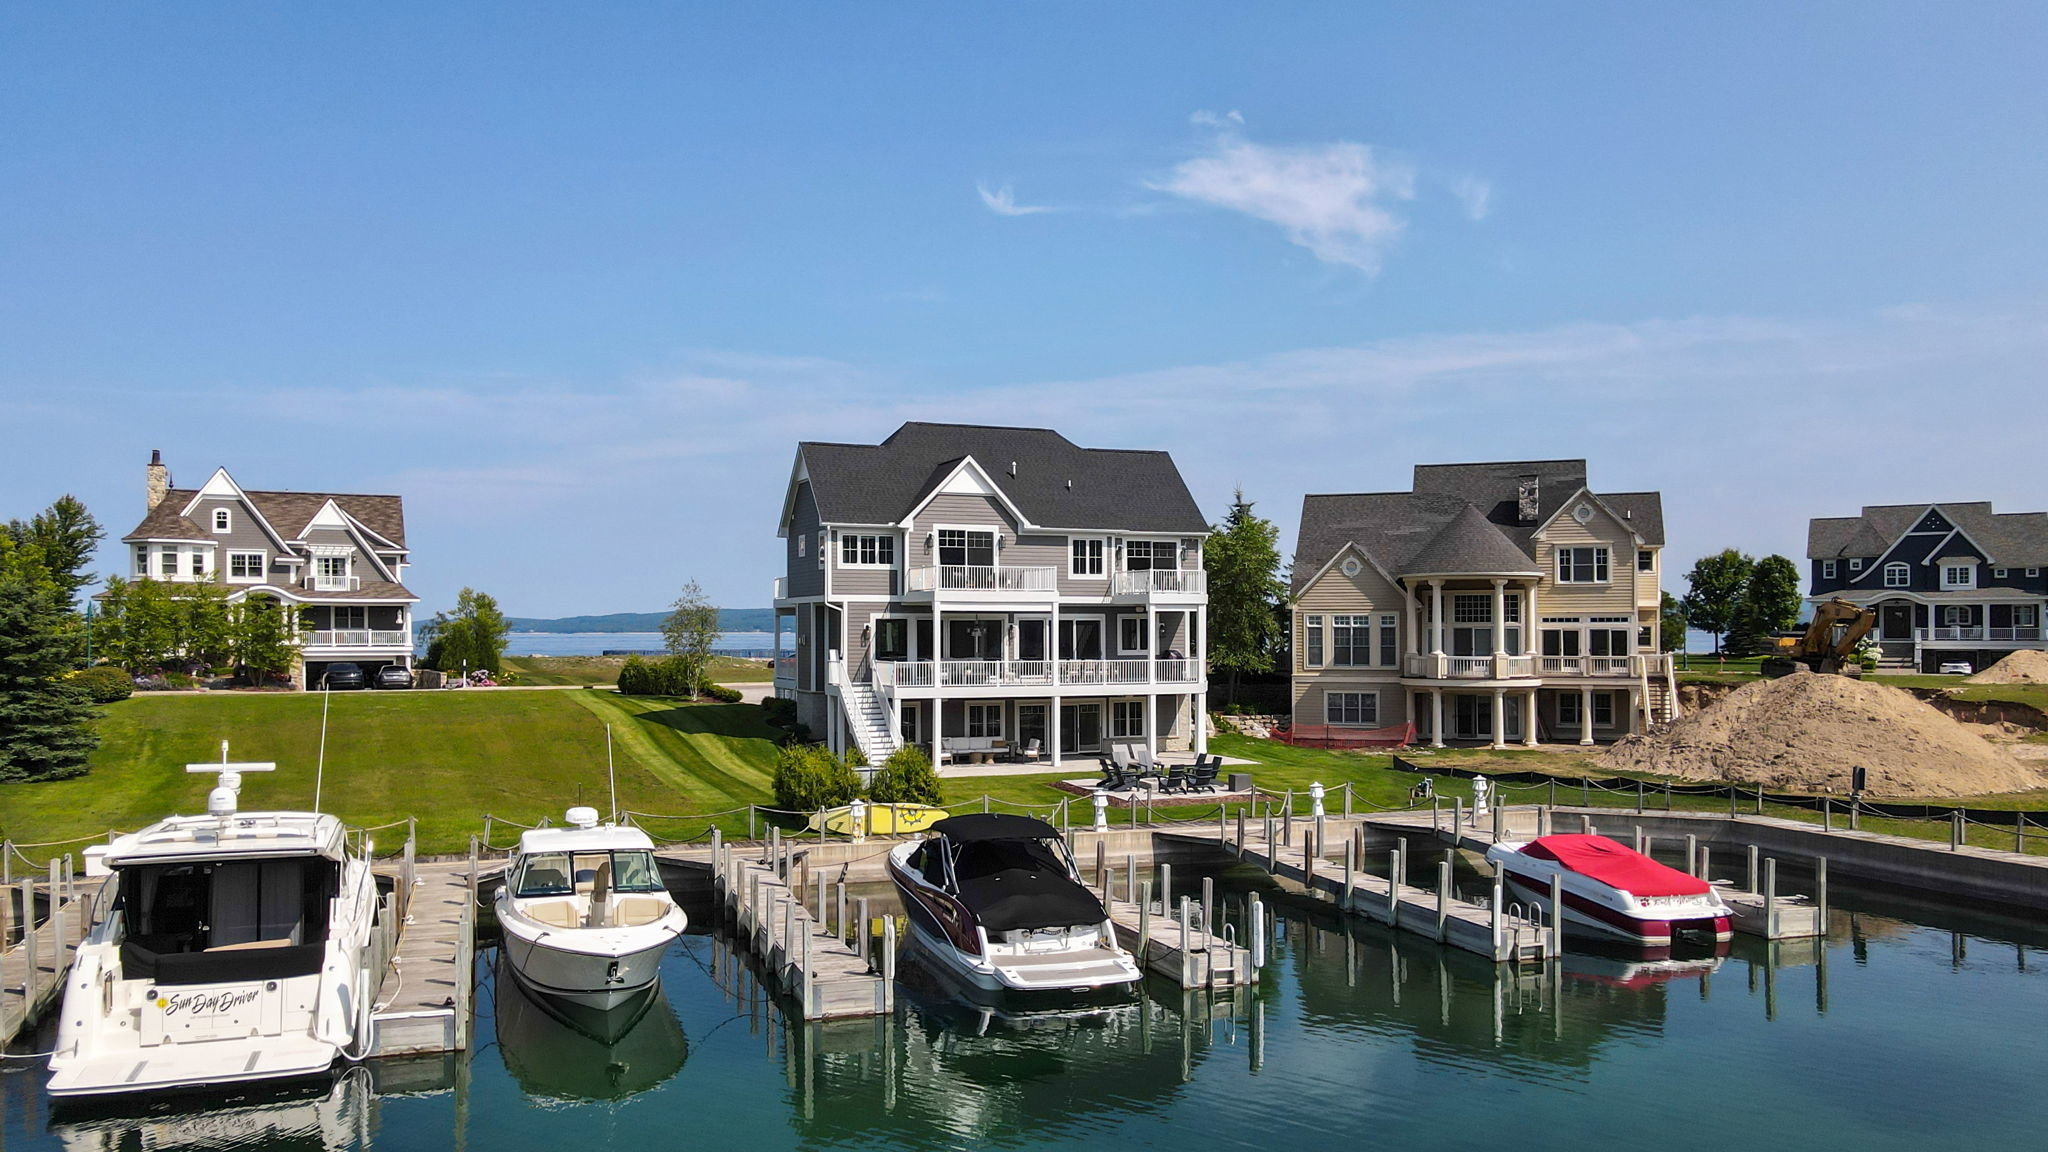 Picture of a luxurious Bay Harbor waterfront home.